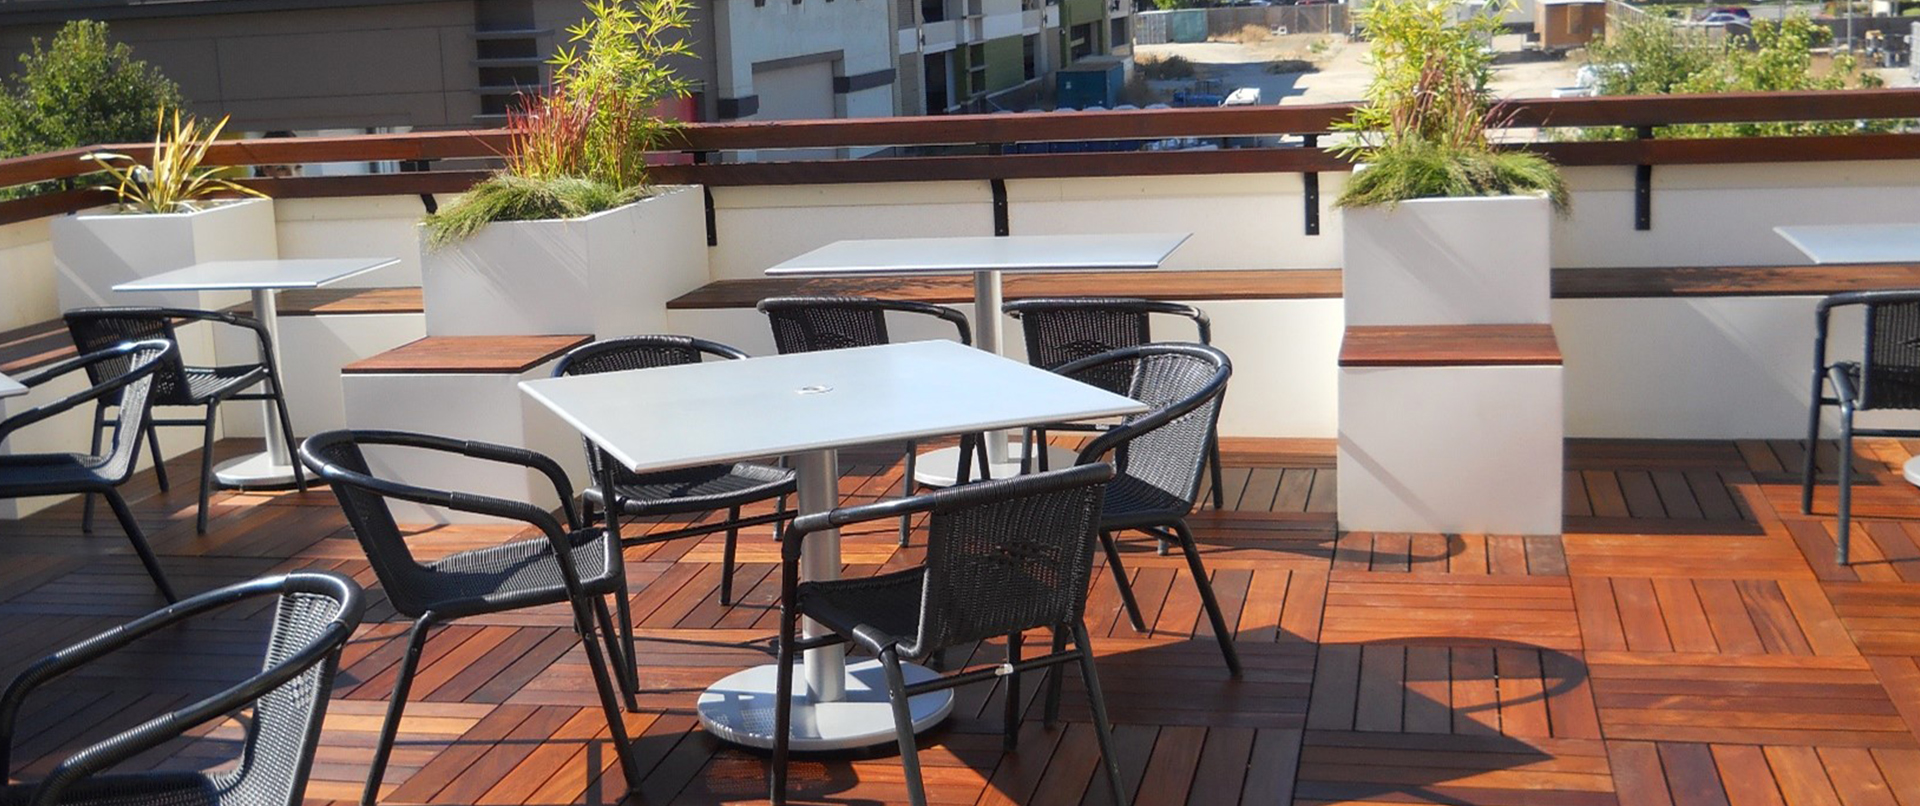 Rooftop with Aluminum Cube Seating and Decor